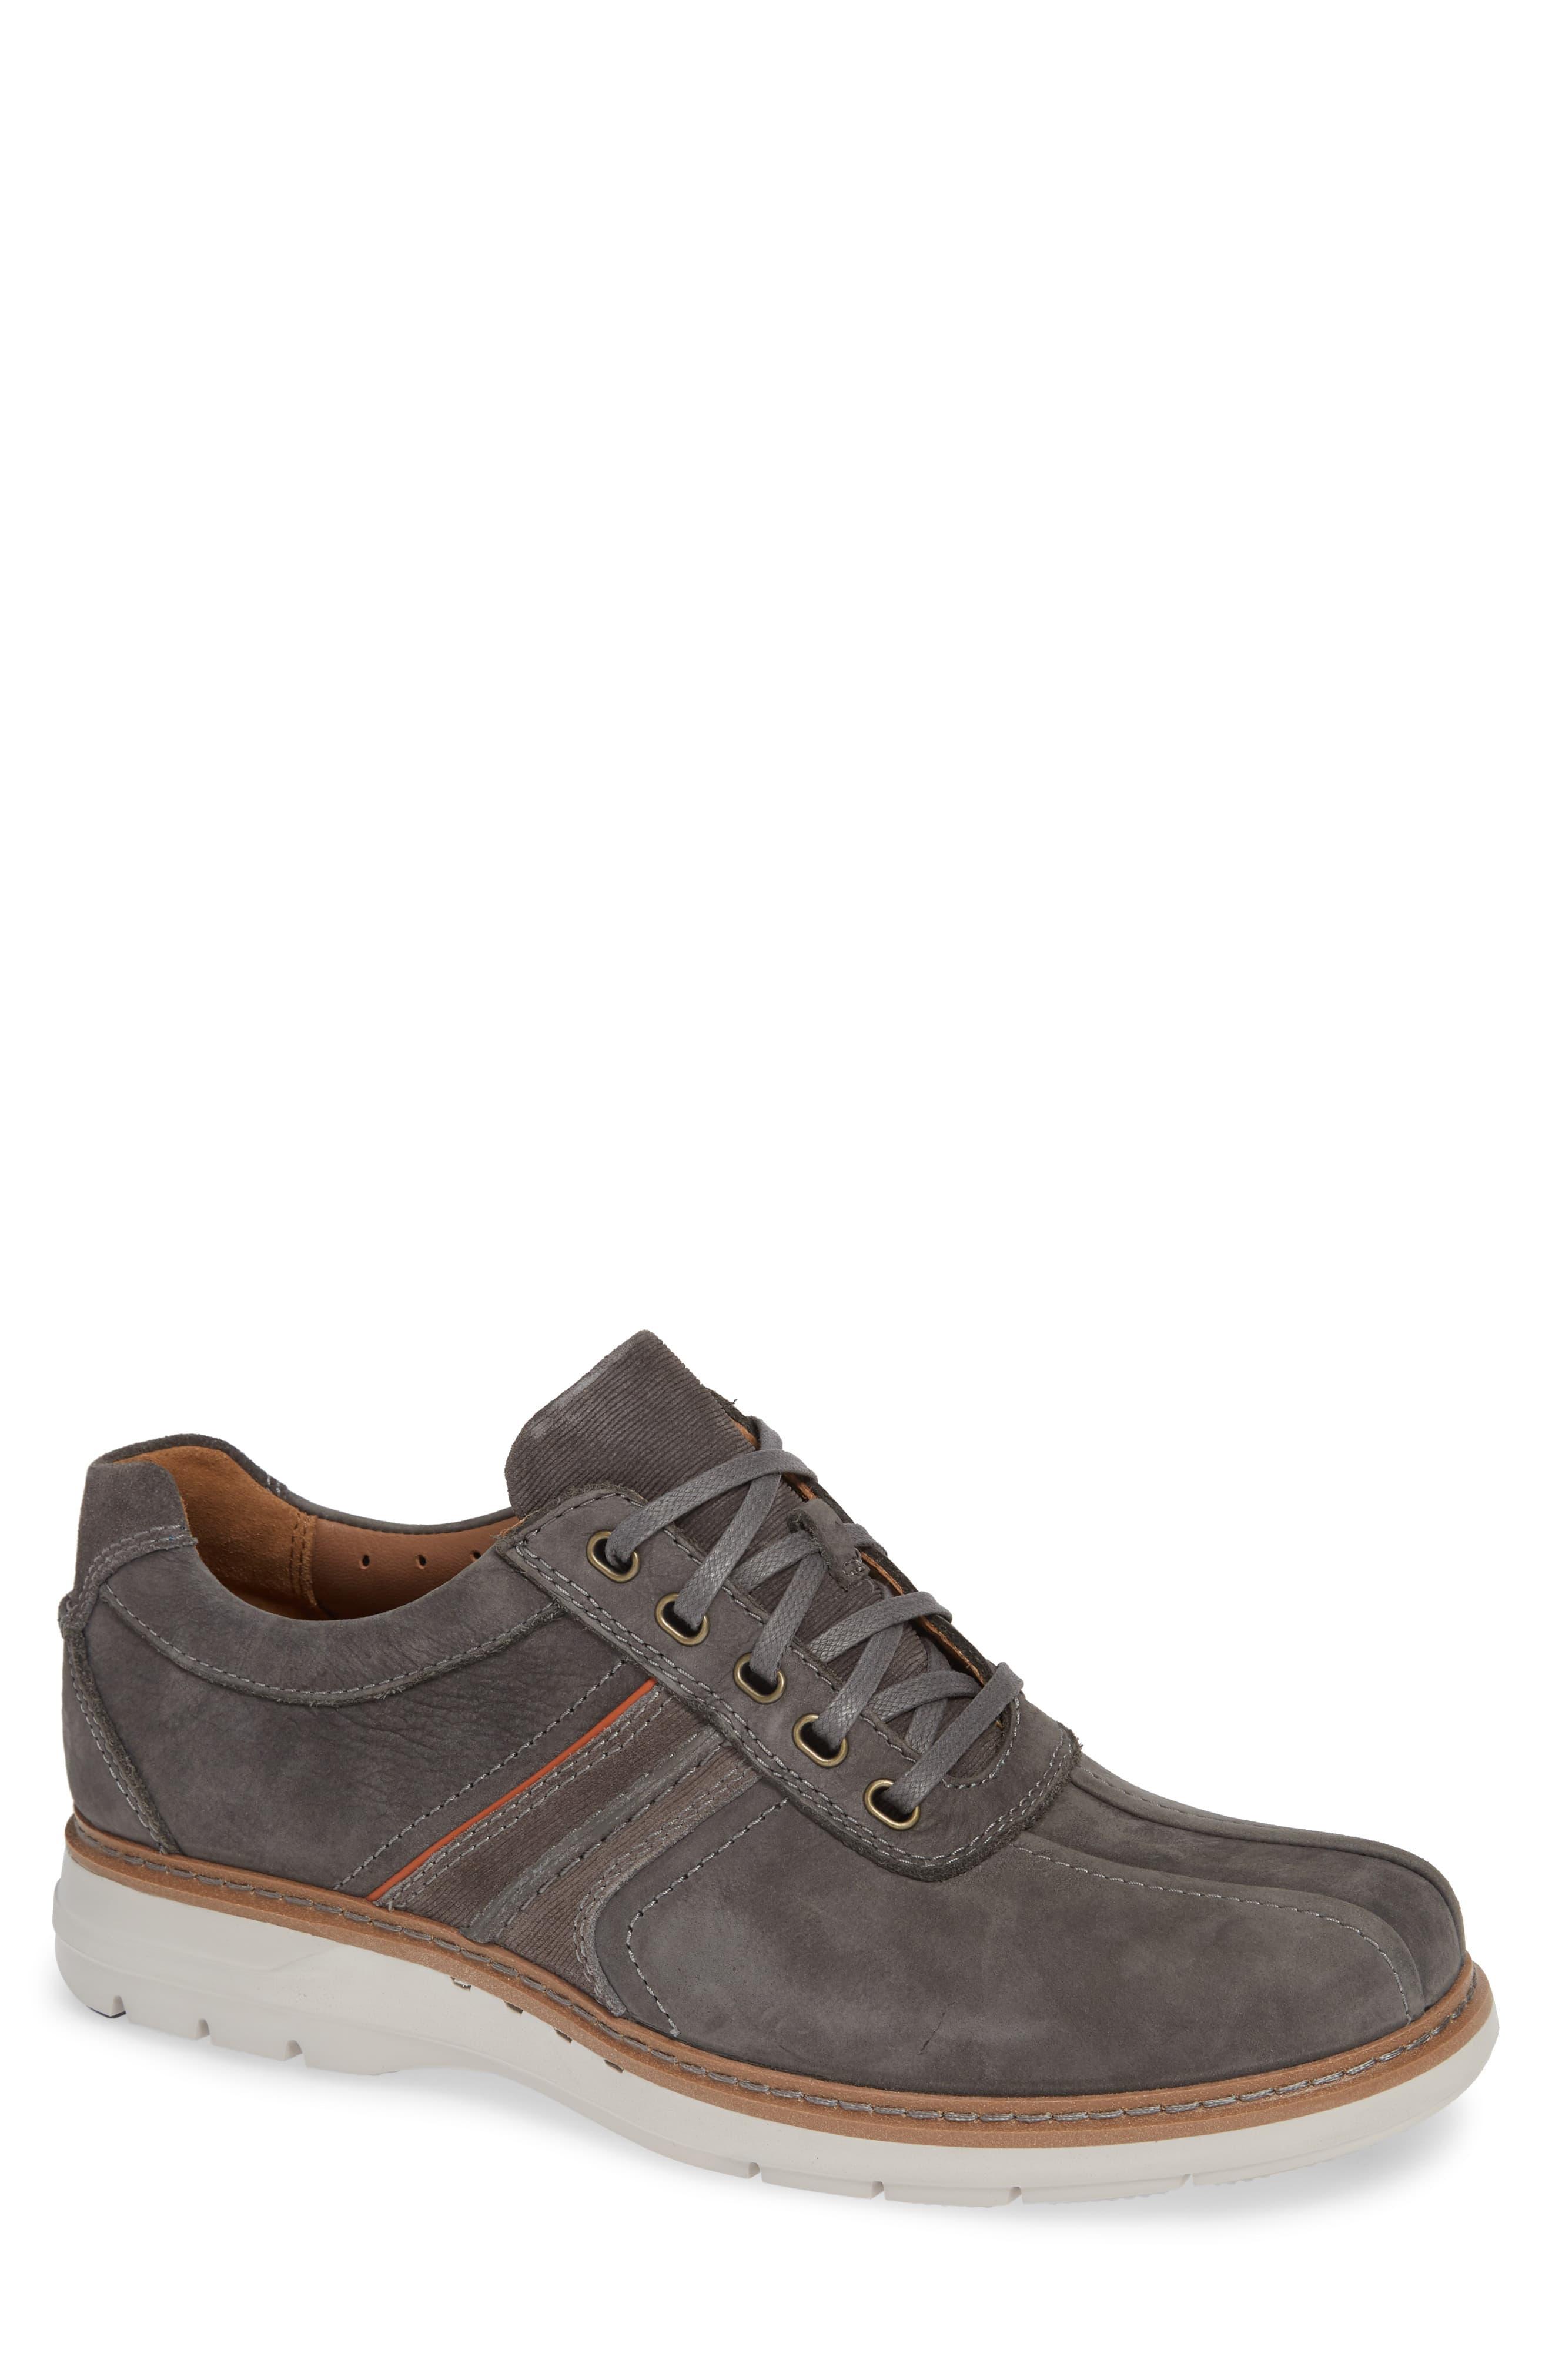 Clarks Leather Un Ramble Go in Grey Leather (Gray) for Men - Save 1% - Lyst